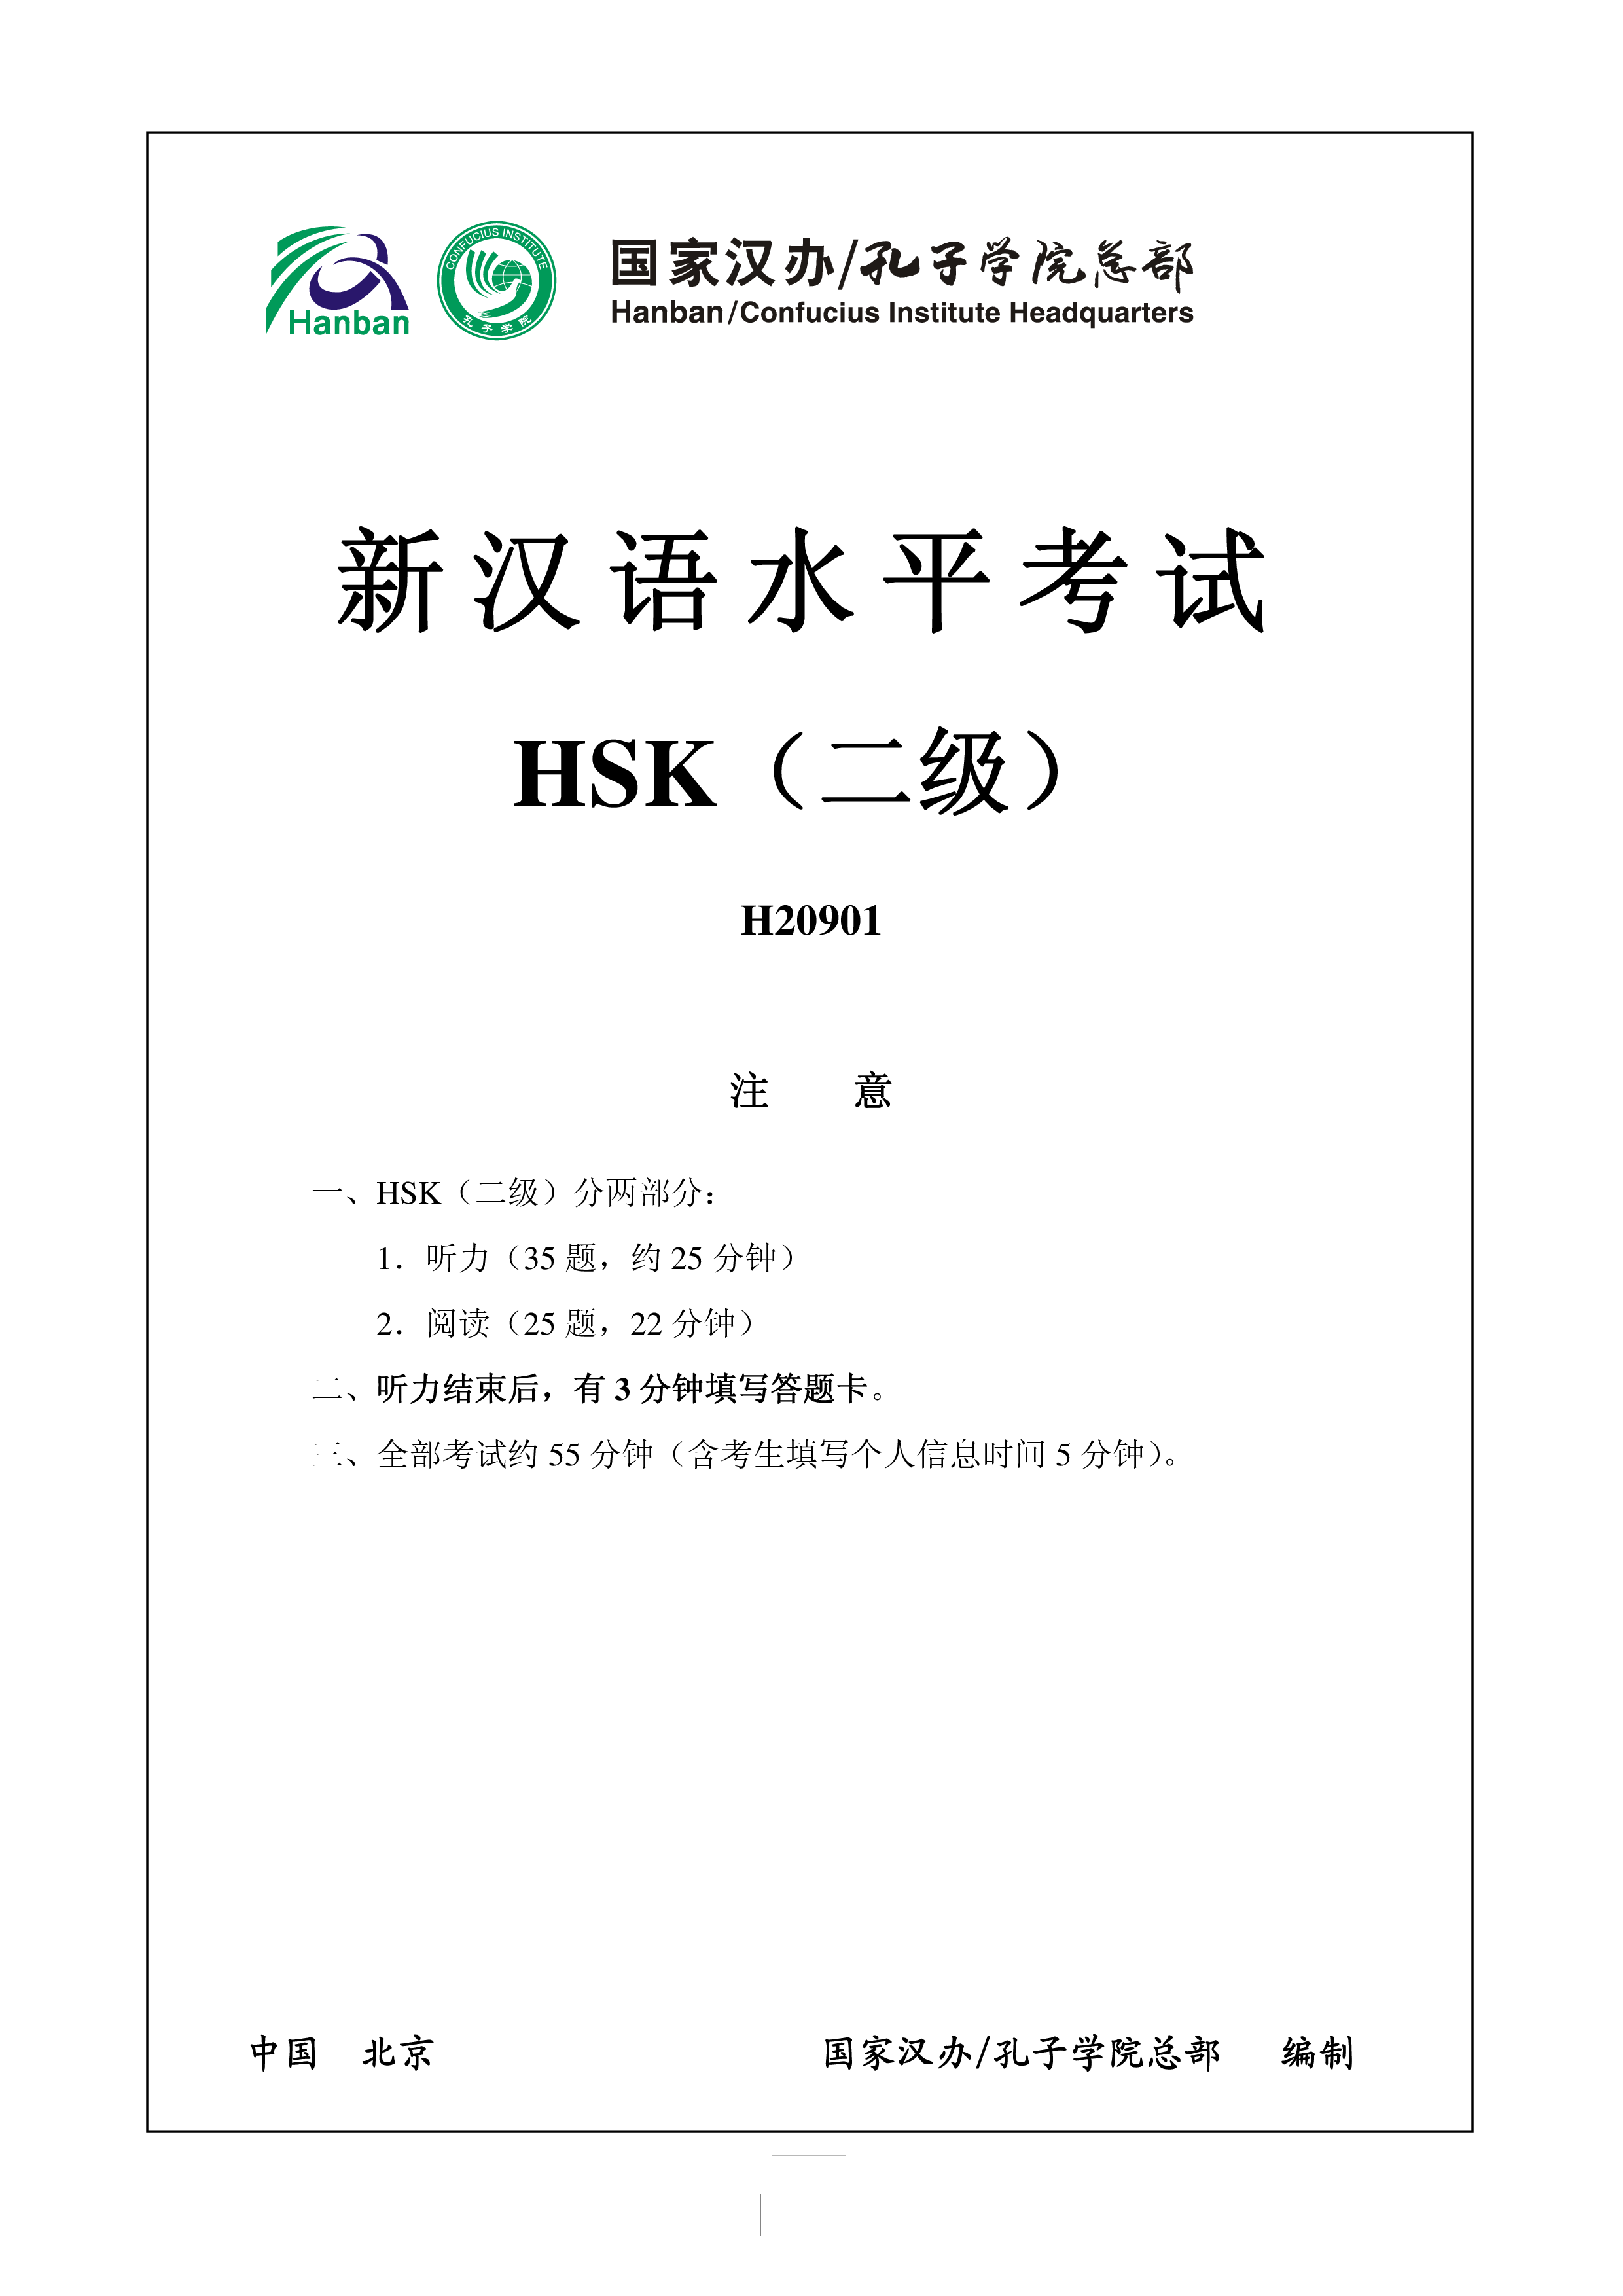 hsk2 chinese exam including answers h20901 plantilla imagen principal